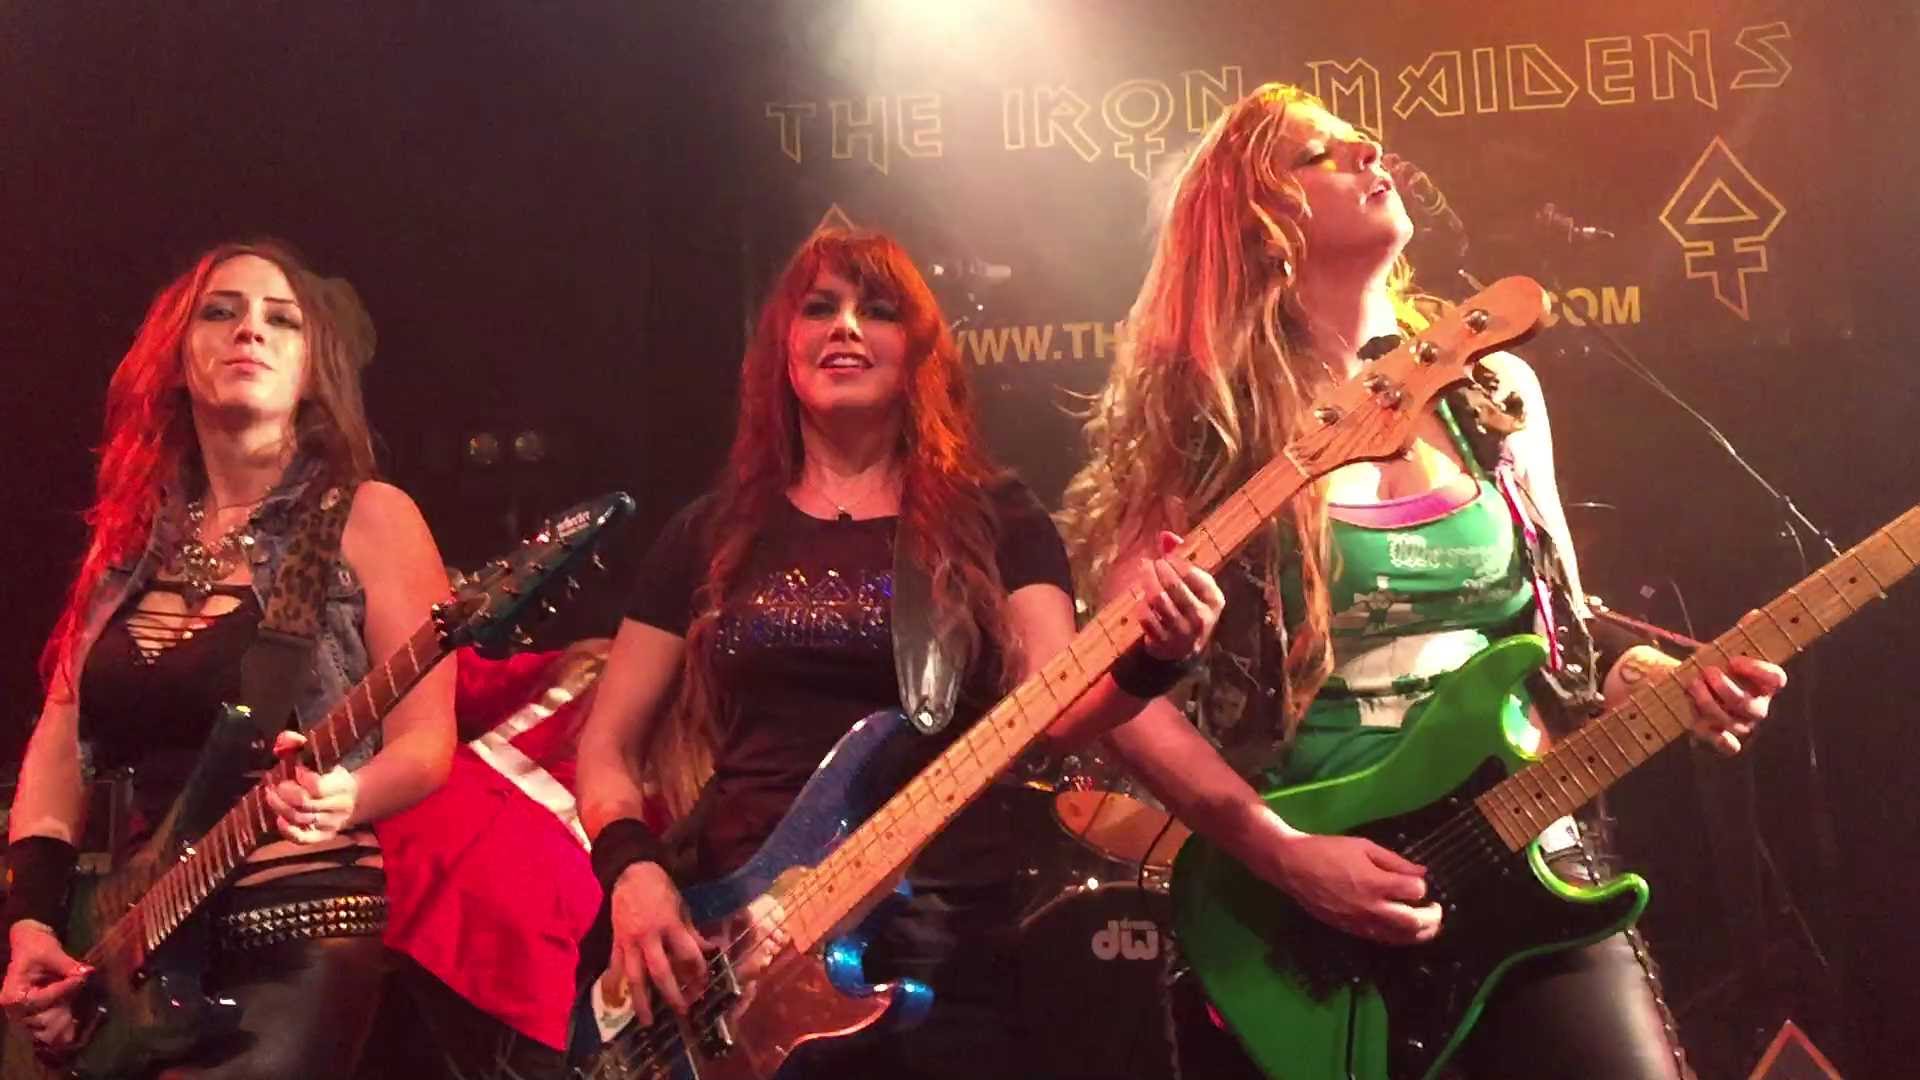 The Iron Maidens wallpaper, Music, HQ The Iron Maidens pictureK Wallpaper 2019